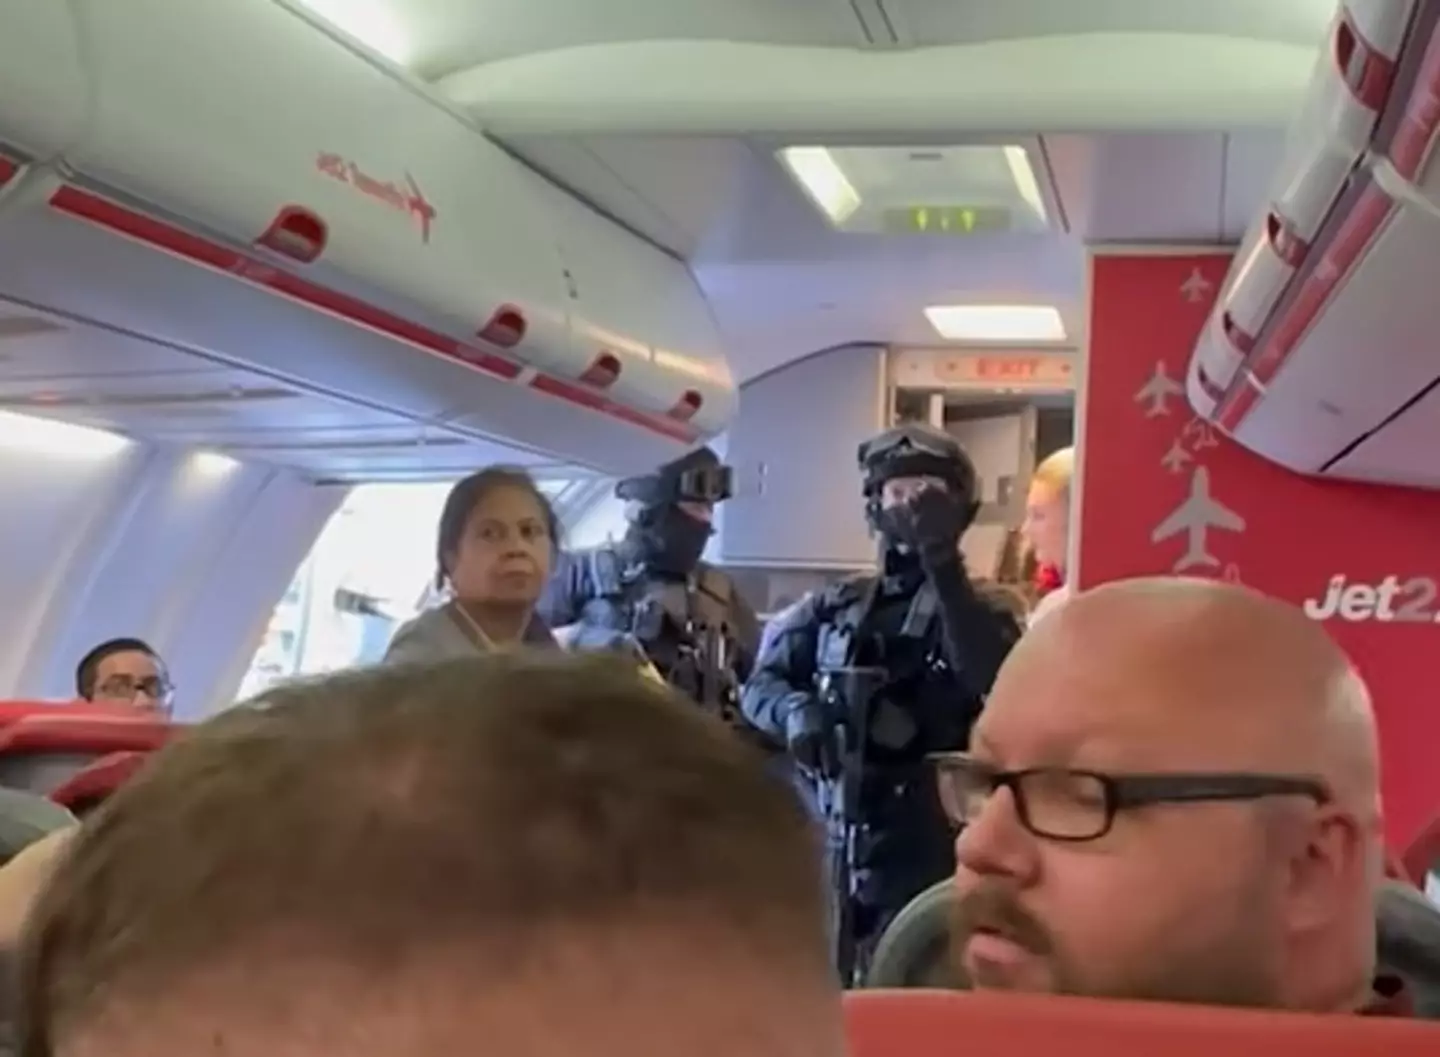 Armed police boarded the plane and demanded a passenger leave with them.